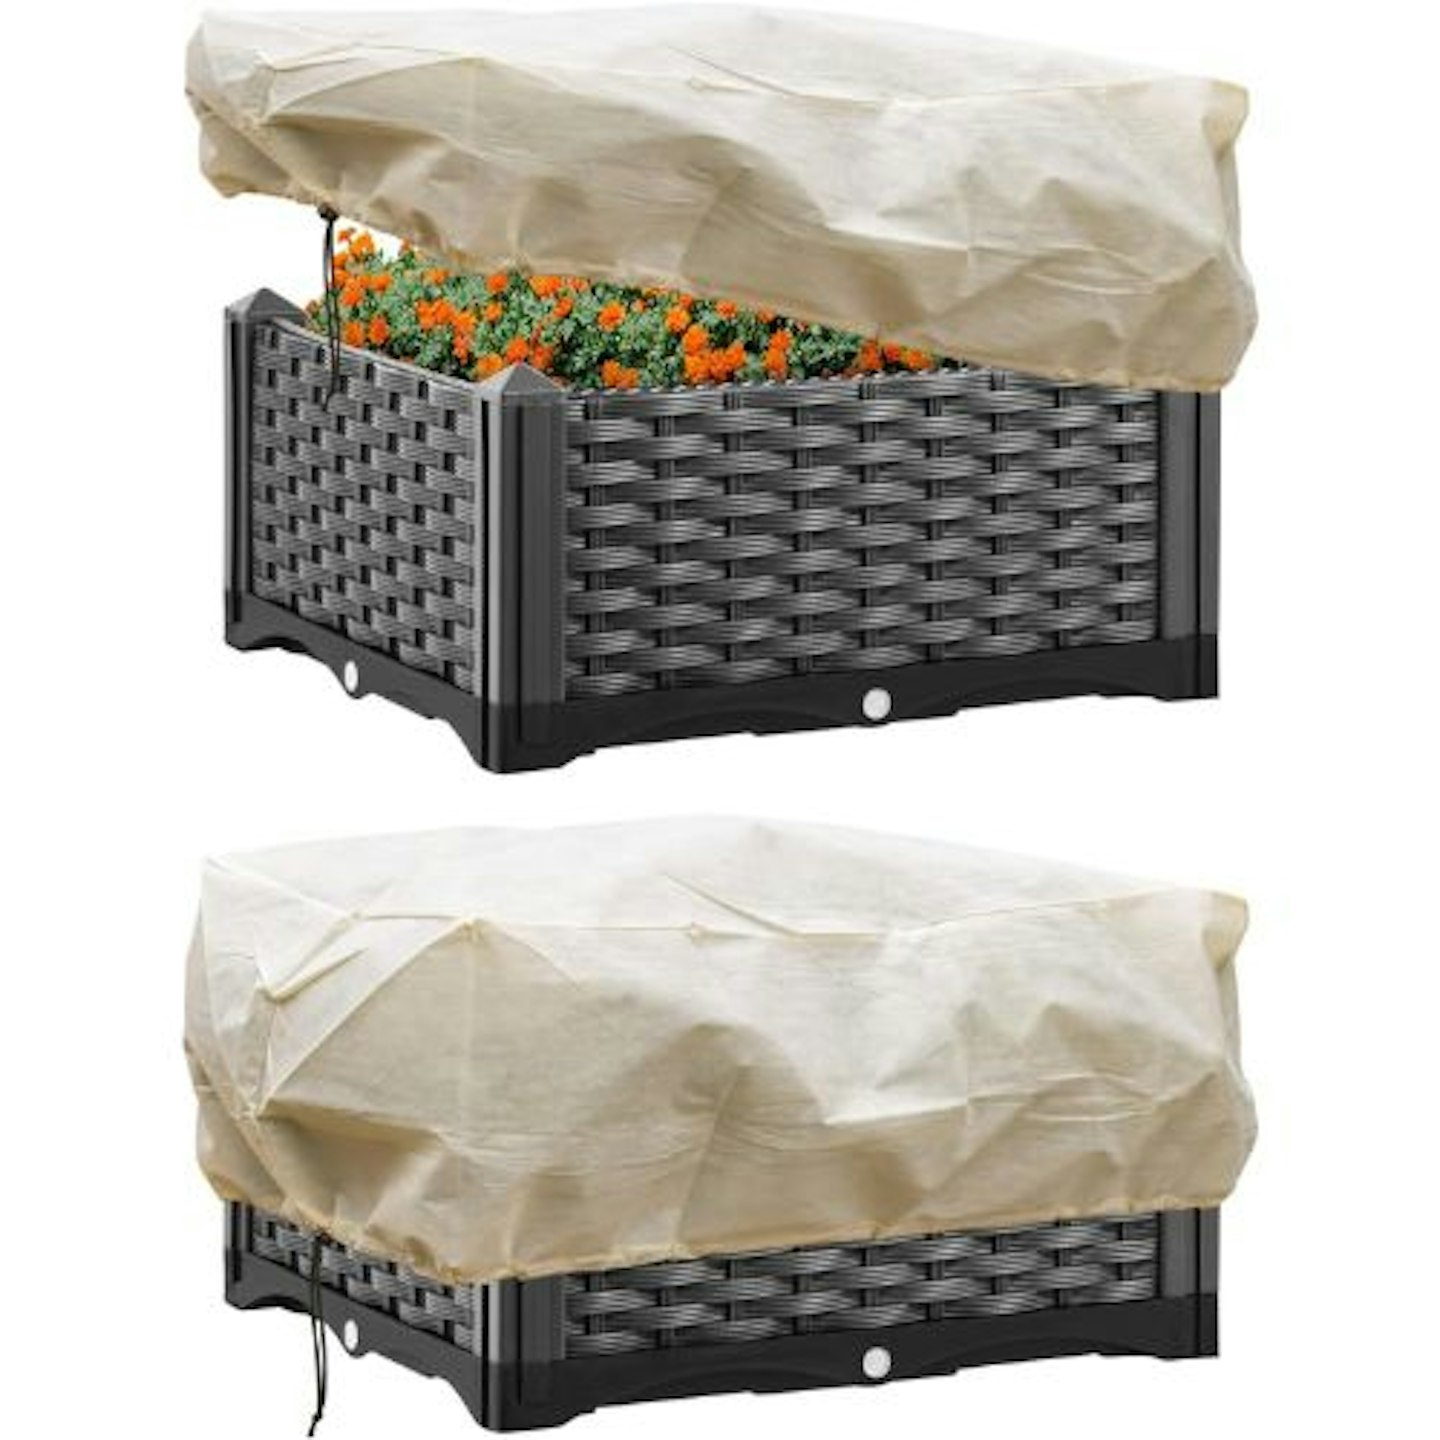 Tesmotor Flower Box Plant Protection Covers for Winter Protection